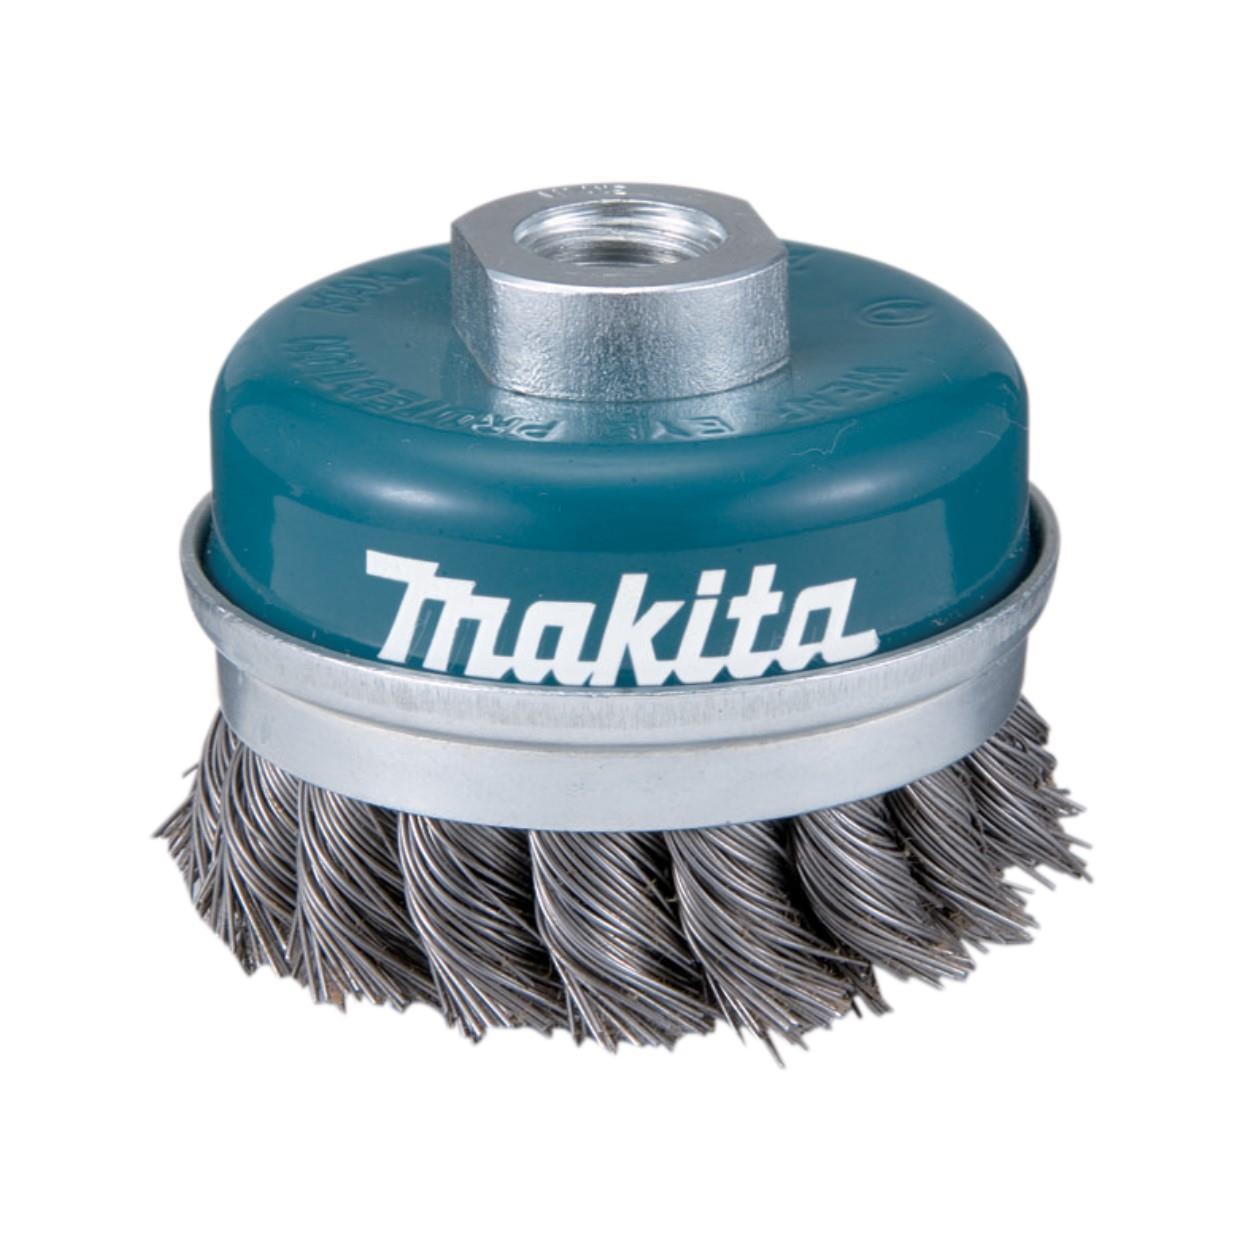 Makita D-24147 Knotted Wire Cup 2 Brush; For Angle Grinder; 60mm Diameter; M10 x 1.5 Spindle Thread